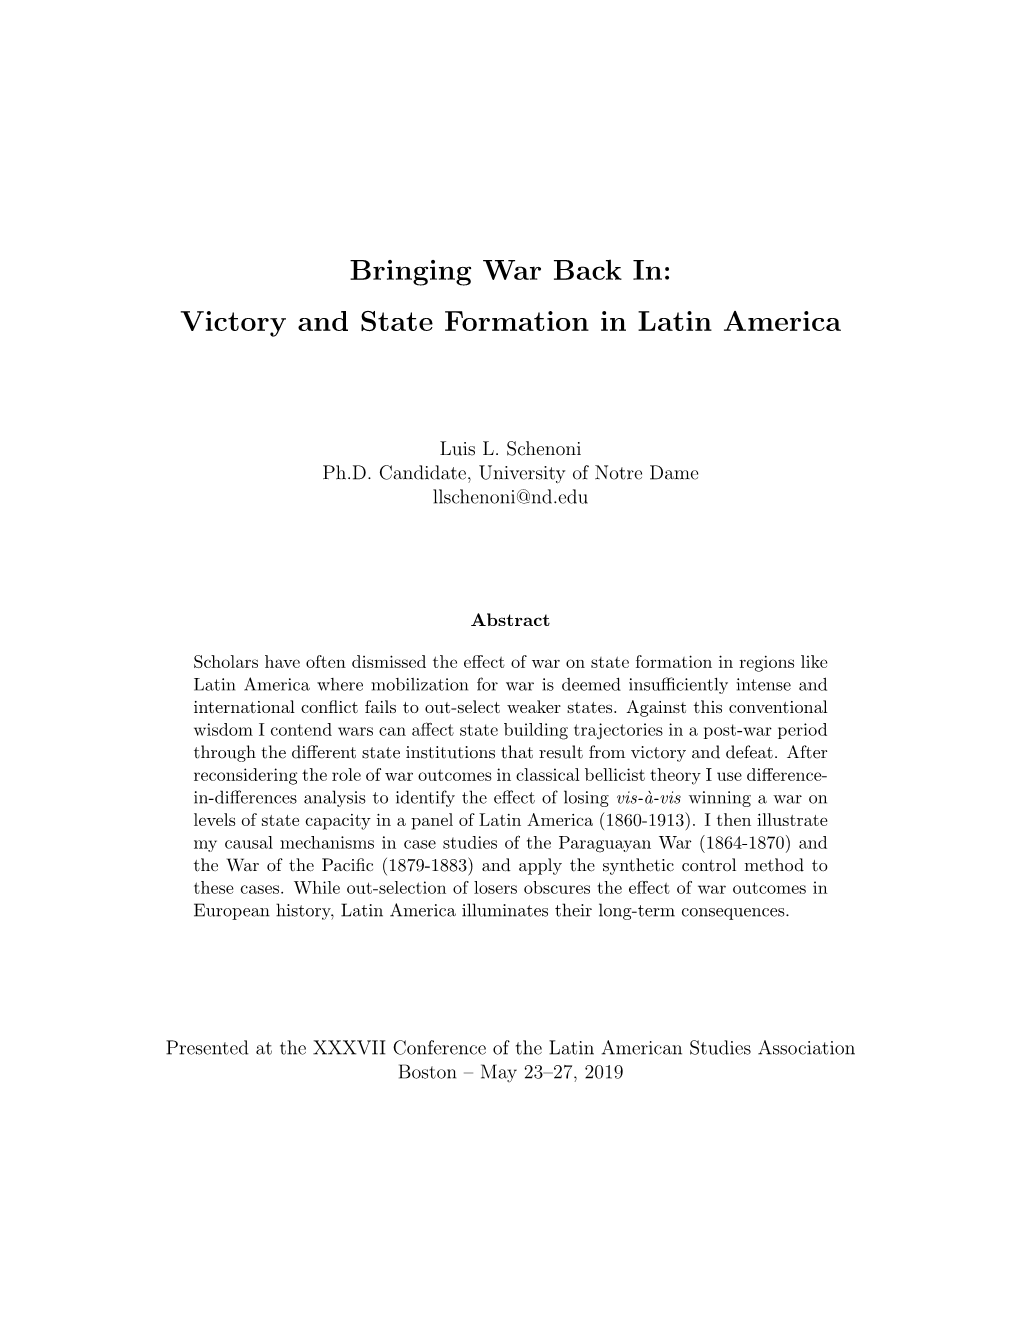 Bringing War Back In: Victory and State Formation in Latin America